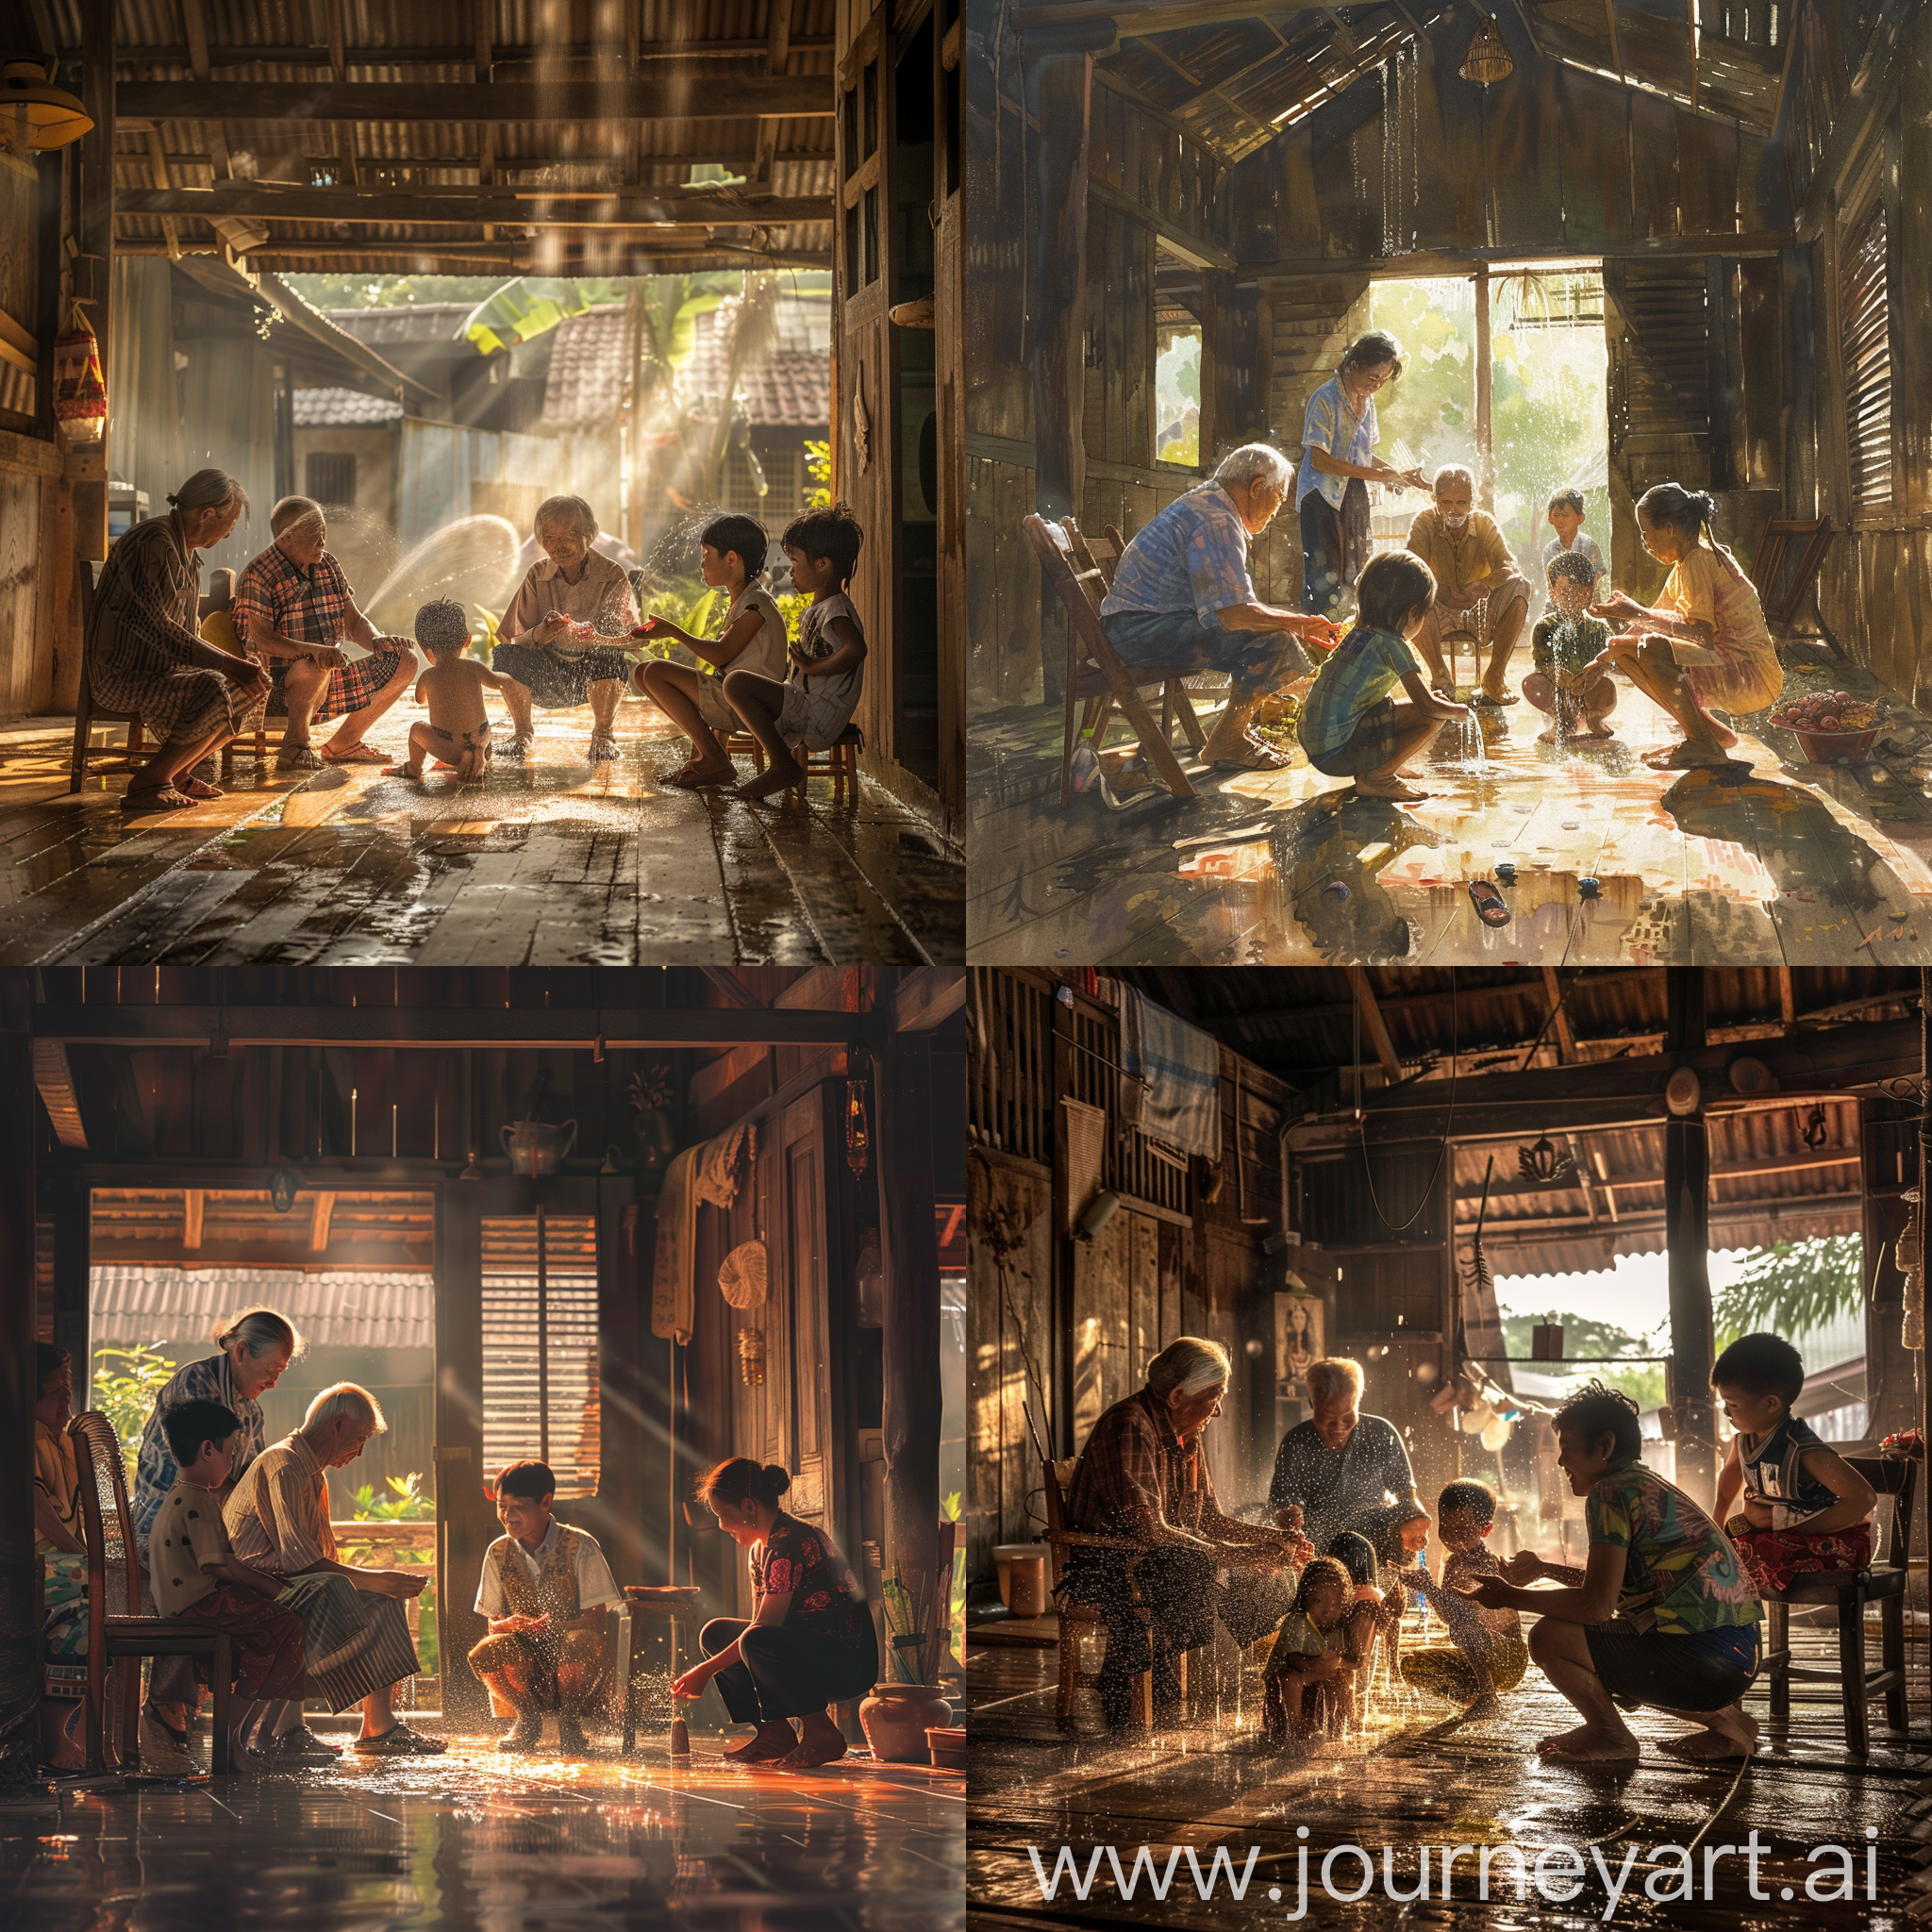 On Songkran Day  The morning sunshine of a new day  The morning light came into a wooden house with grandparents sitting on chairs. and the descendants squatted on the ground  Drawing water Sprinkle it on the hands of adults to make a wish.  ask for blessing from the elders.